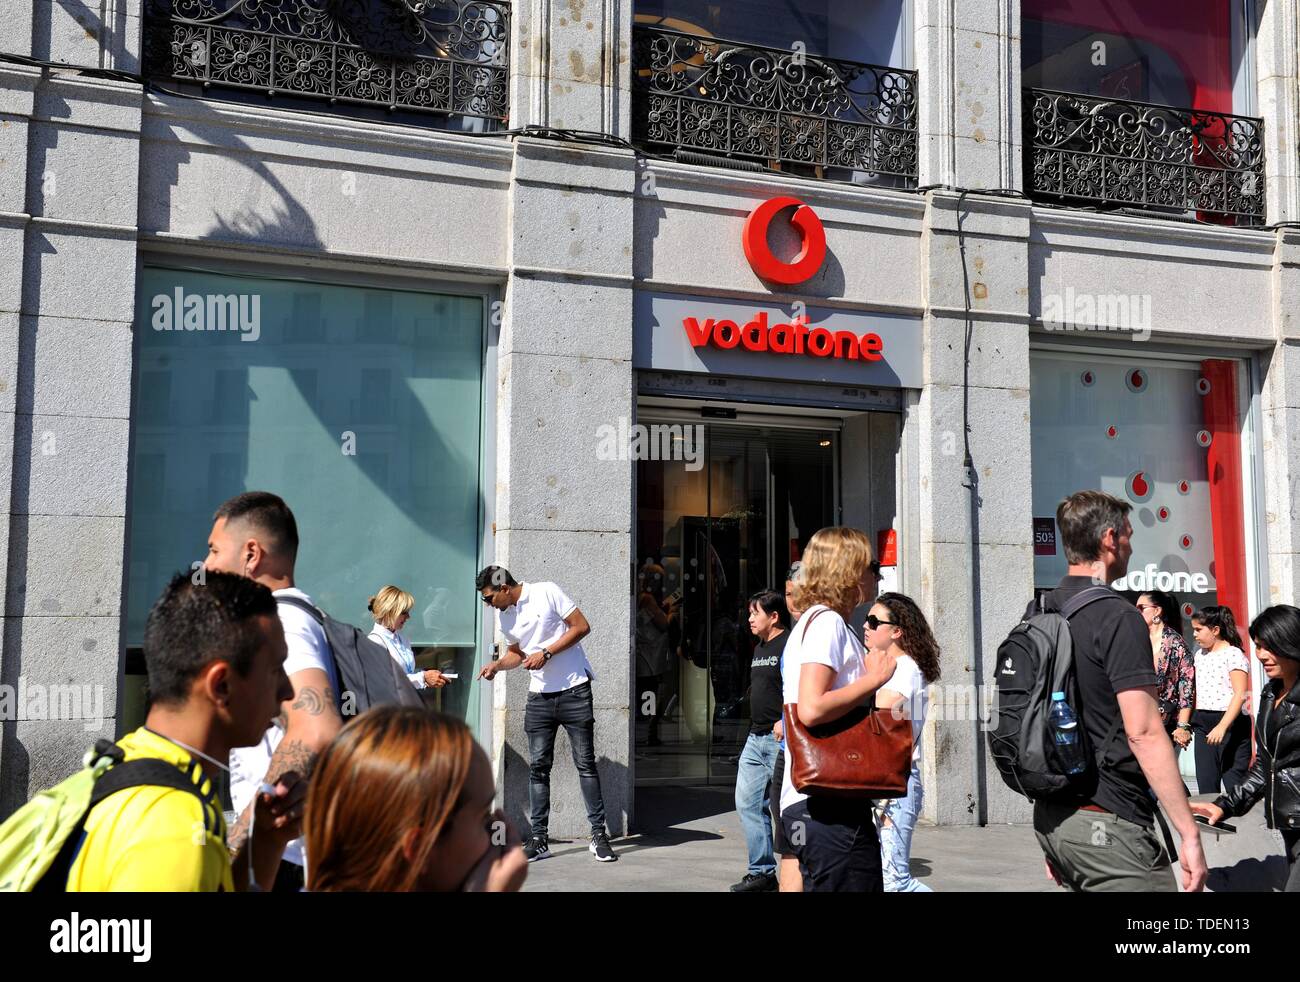 Madrid, Spain. 15th June, 2019. Pedestrians walk past a store of Vodafone Espana in Madrid, Spain, on June 15, 2019. In cooperation with Chinese telecom giant Huawei, Vodafone Espana on Saturday rolled out the first commercial 5G mobile services in Spain, making it one of the first European countries with the ultrafast mobile network in Europe. Credit: Guo Qiuda/Xinhua/Alamy Live News Stock Photo